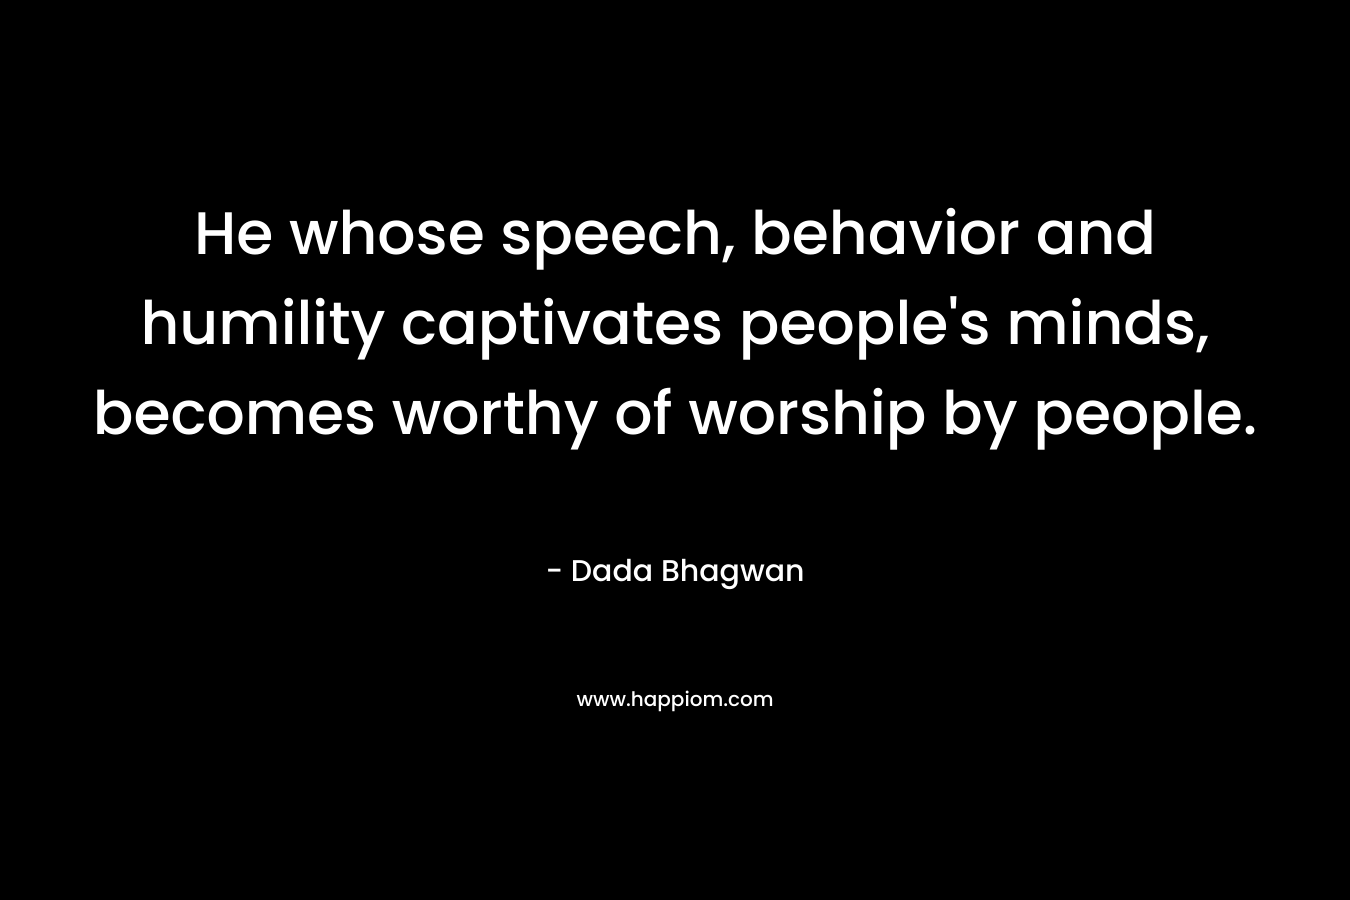 He whose speech, behavior and humility captivates people’s minds, becomes worthy of worship by people. – Dada Bhagwan